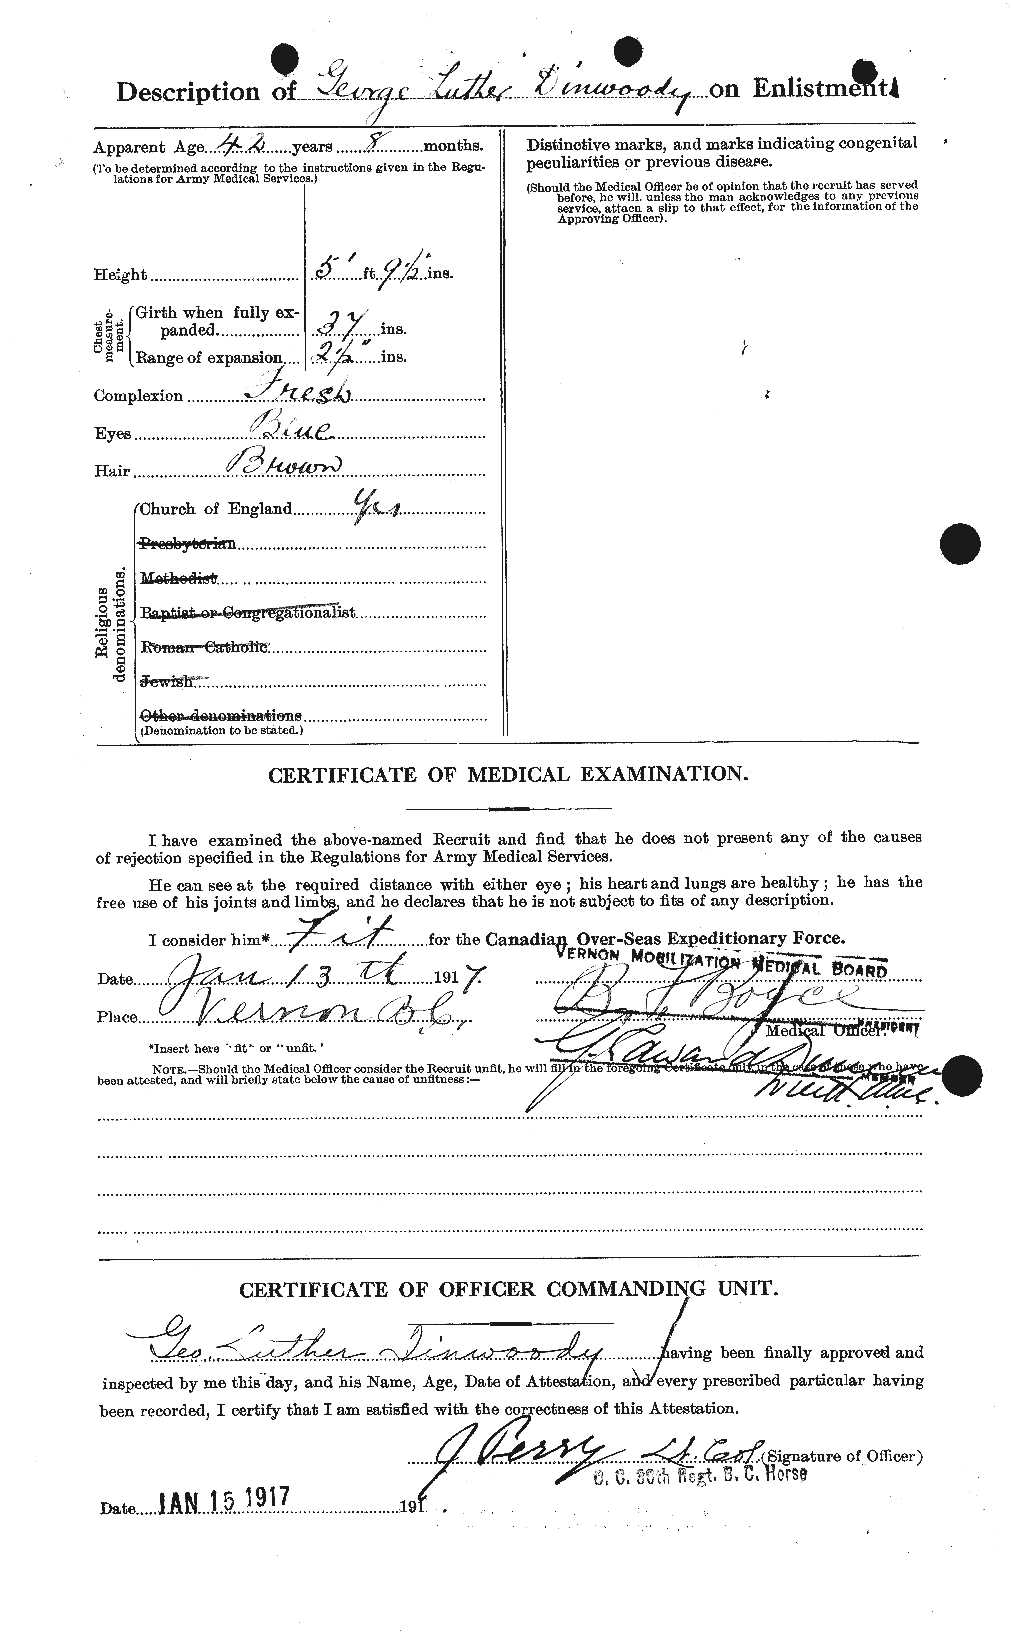 Attestation record: George Luther Dinwoody